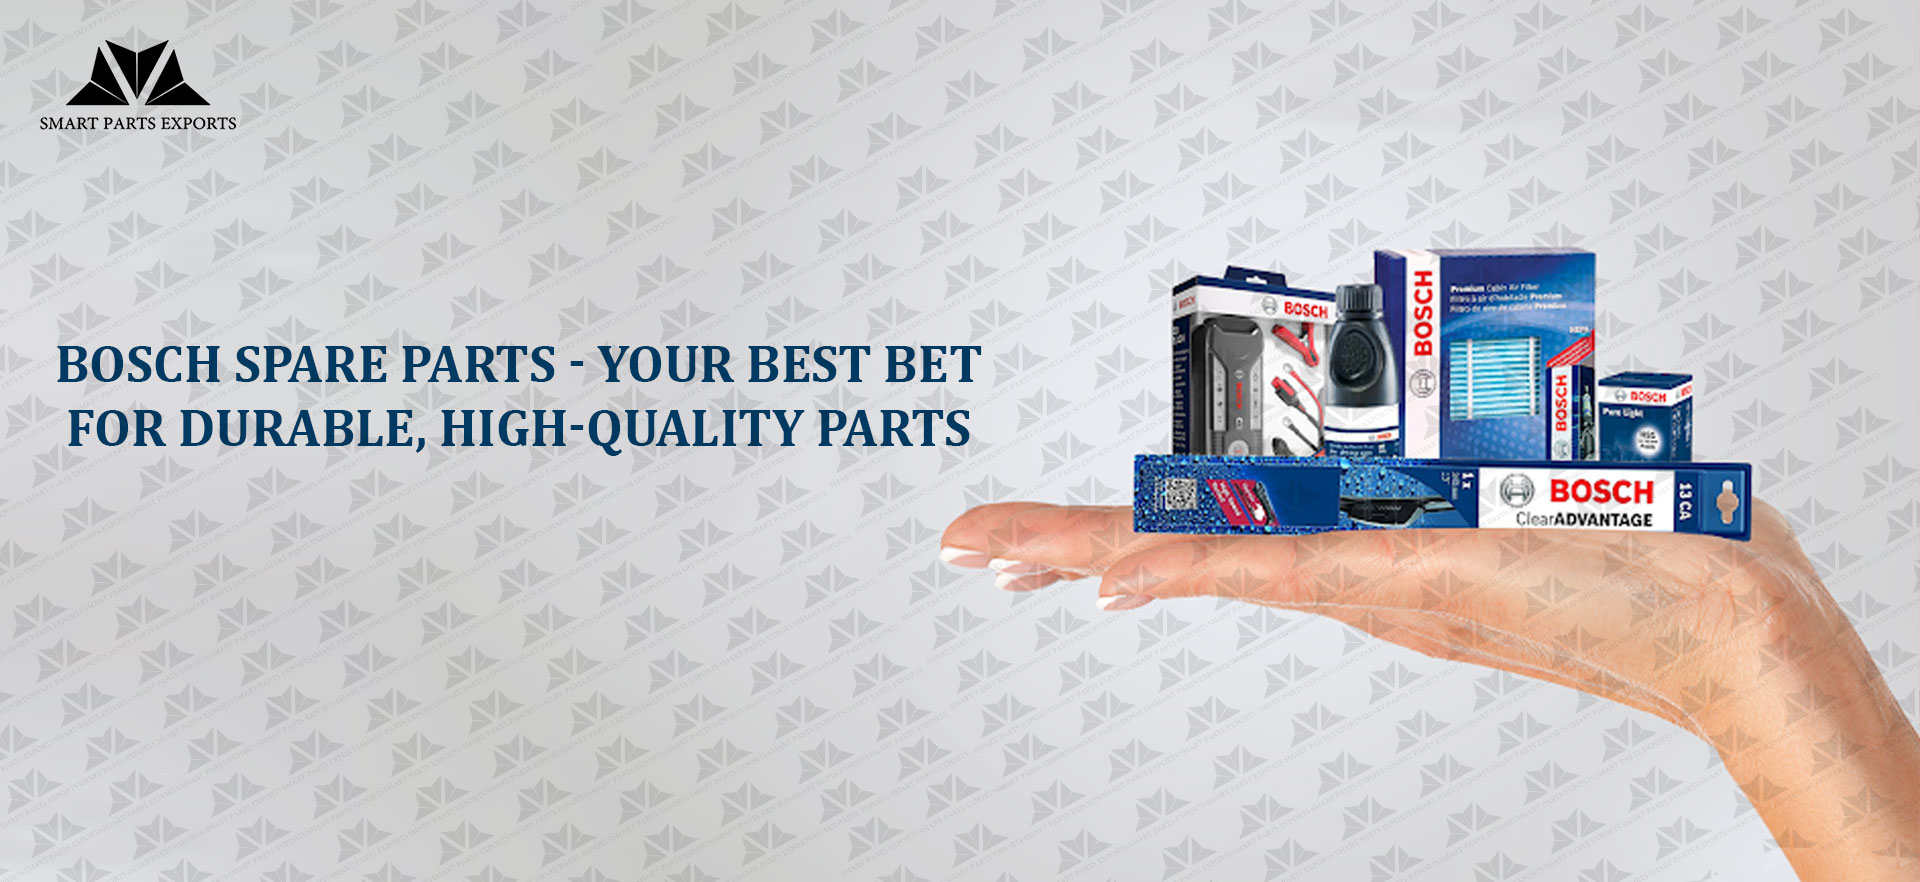 Bosch Spare Parts - Your Best Bet for Durable, High-Quality Parts